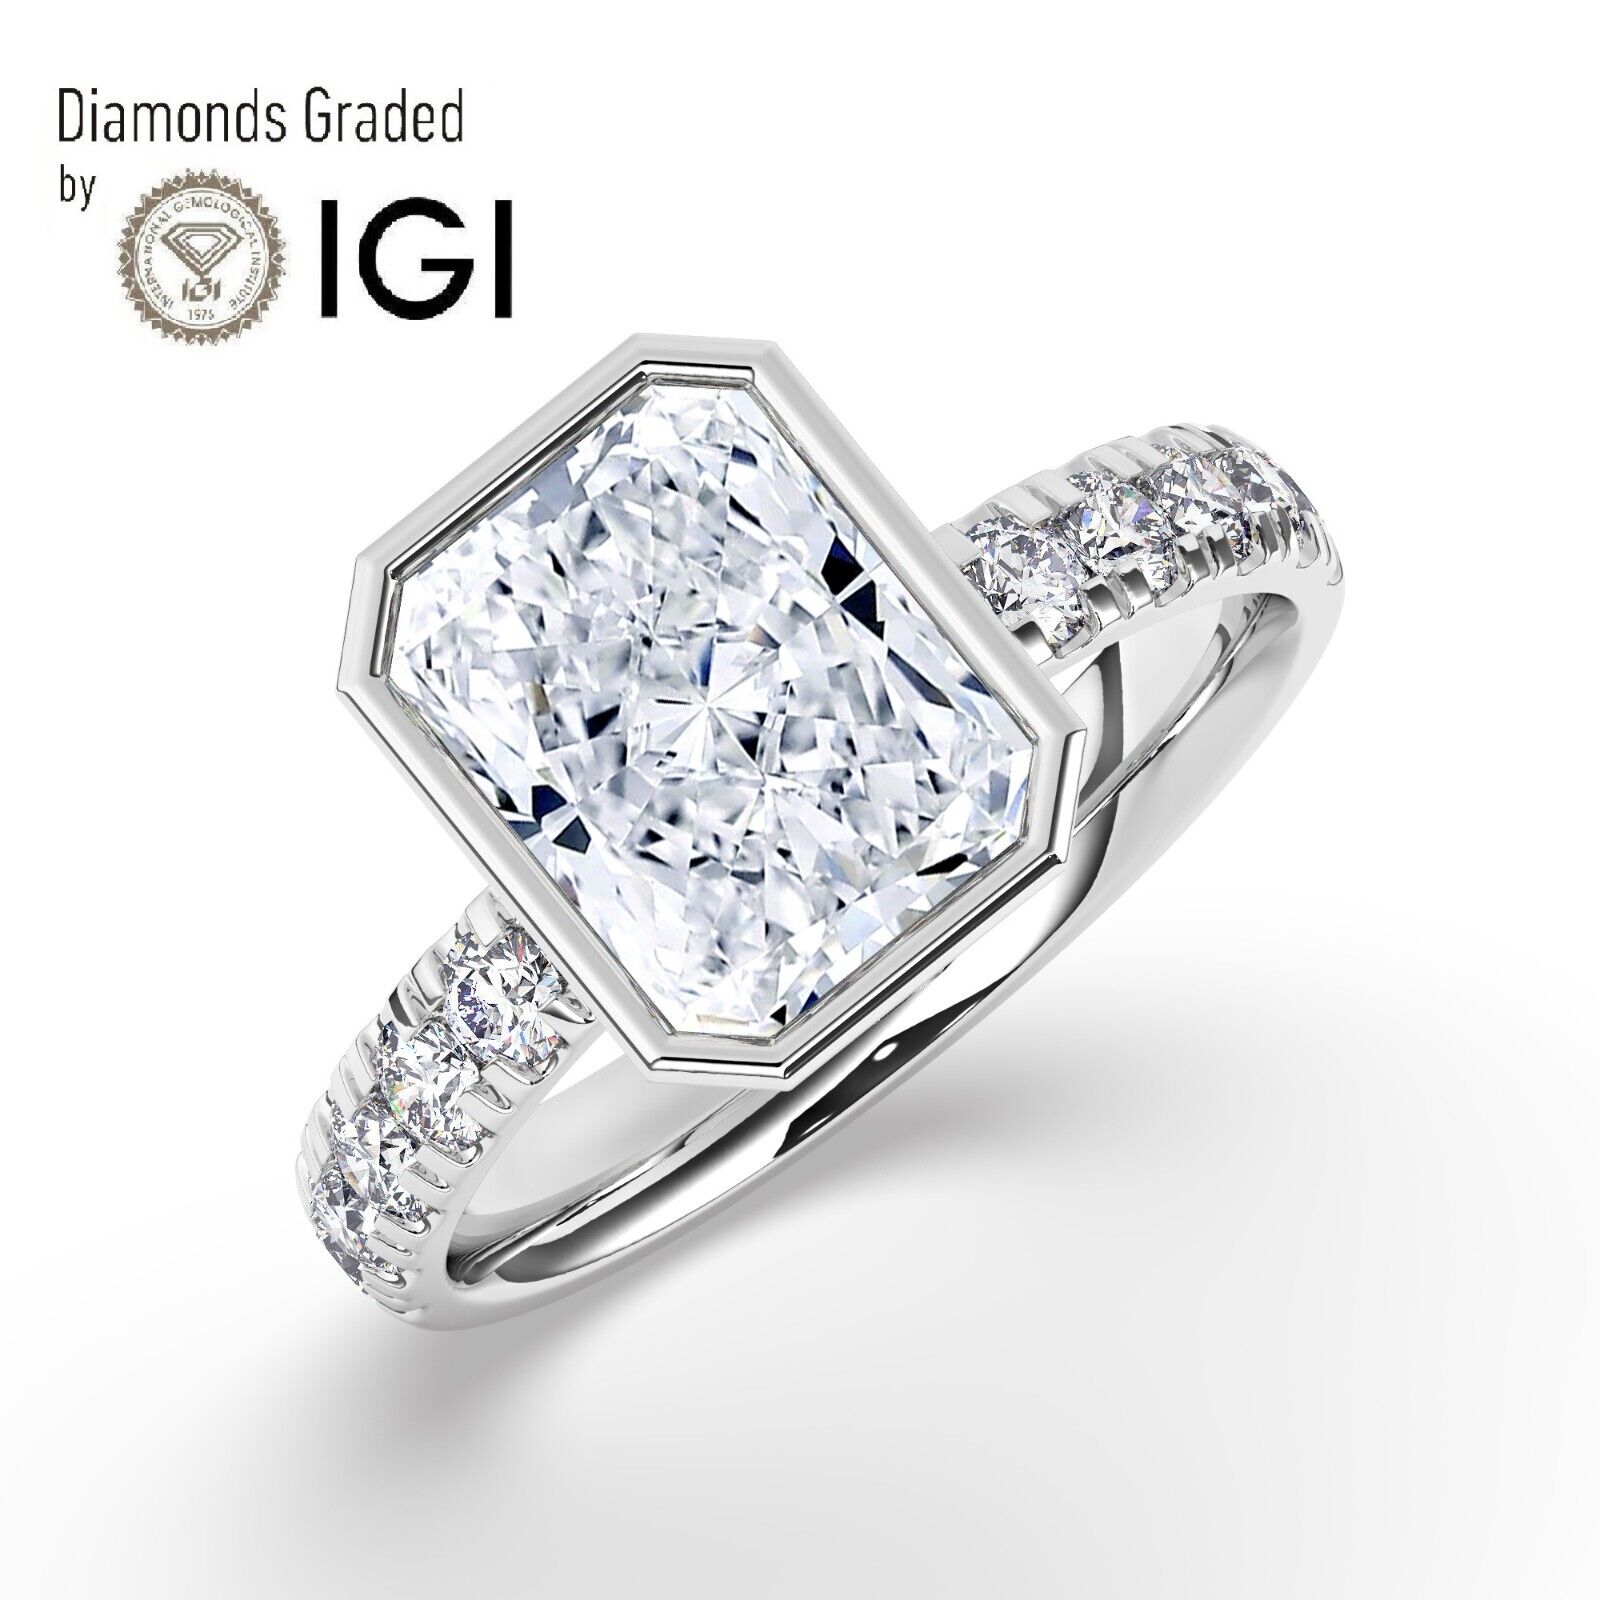 Radiant Solitaire 18K White Gold Engagement Ring,3 ct, Lab-grown IGI Certified